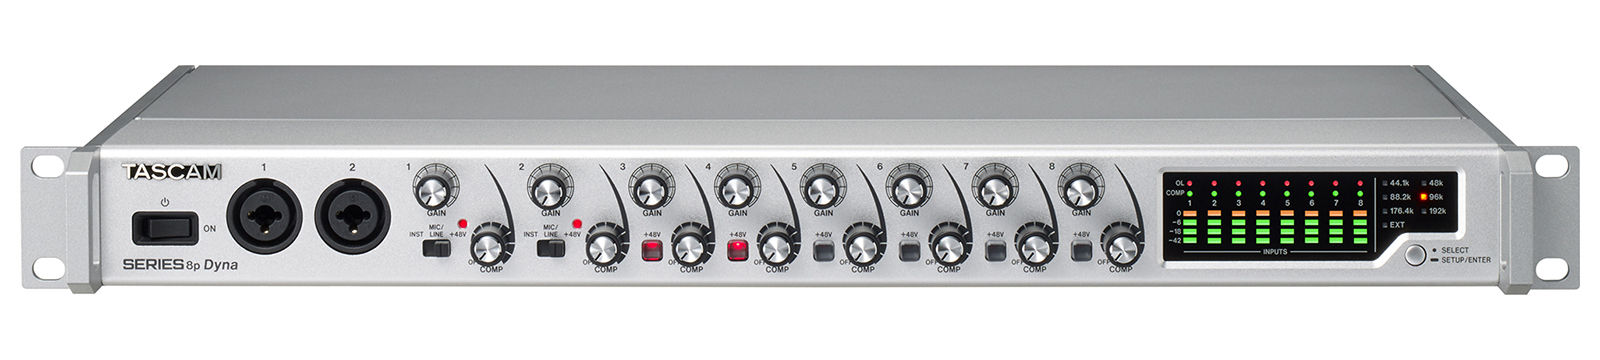 Tascam SERIES 8p Dyna - 8 channel mic preamplifier with analog compressor